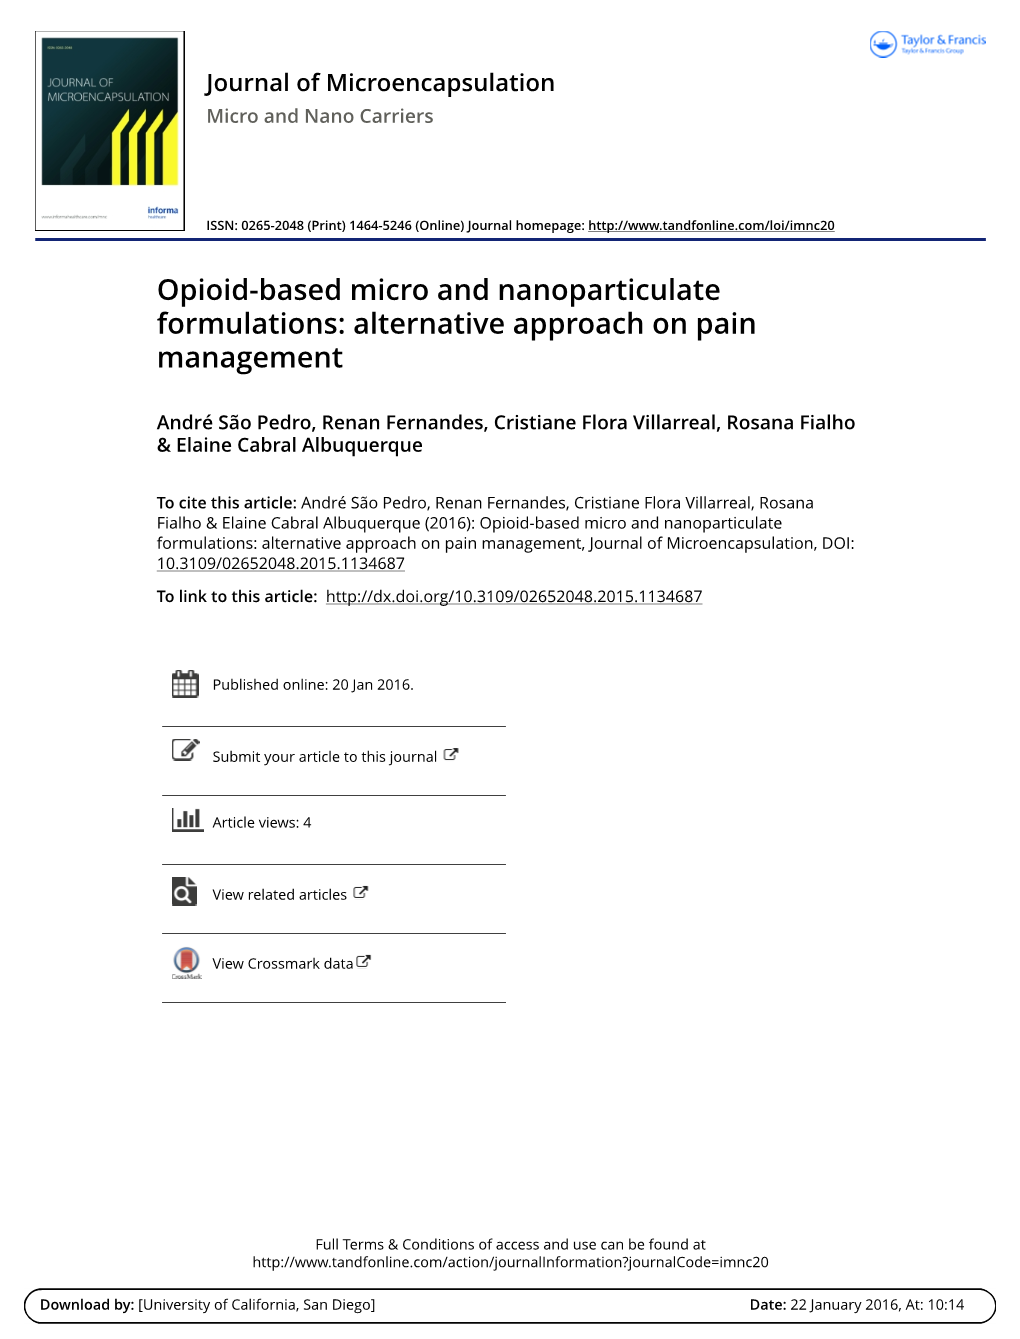 Opioid-Based Micro and Nanoparticulate Formulations: Alternative Approach on Pain Management